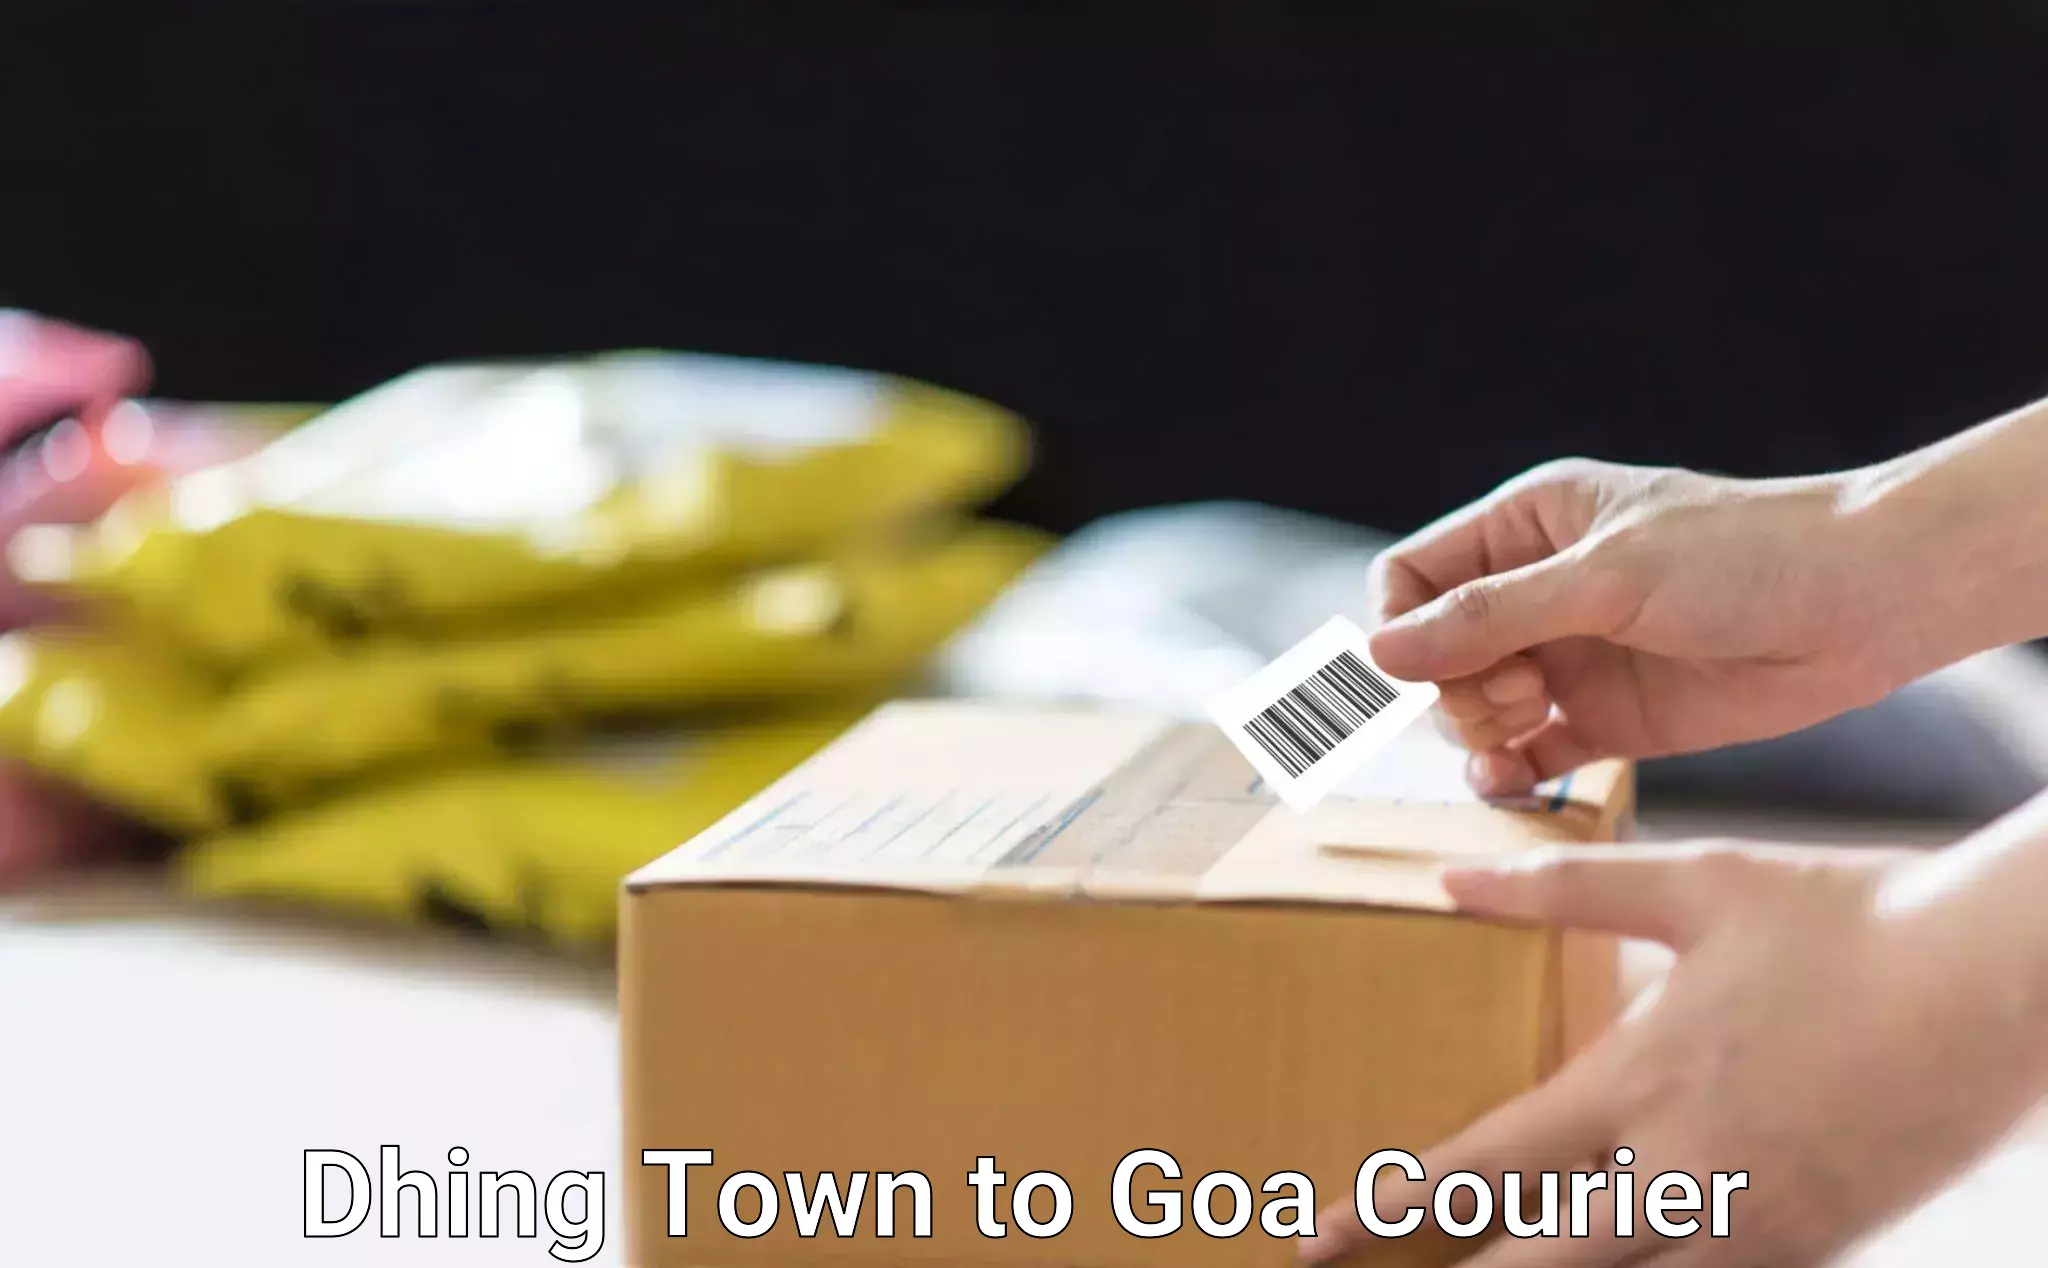 Courier service innovation Dhing Town to Goa